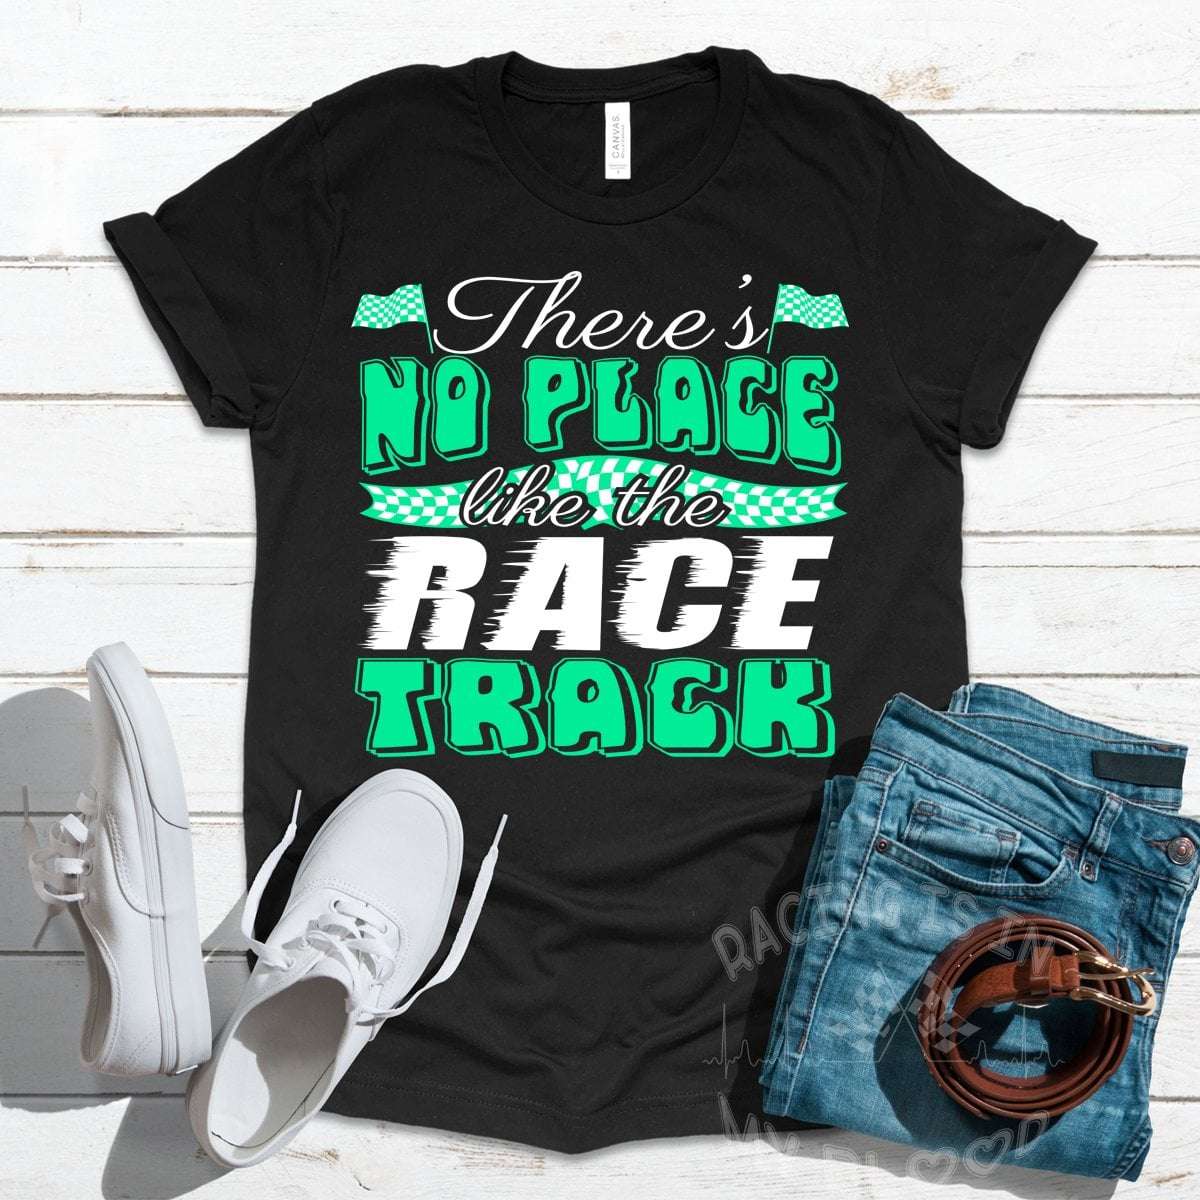 There's no place like the race track - Racing season, racer life